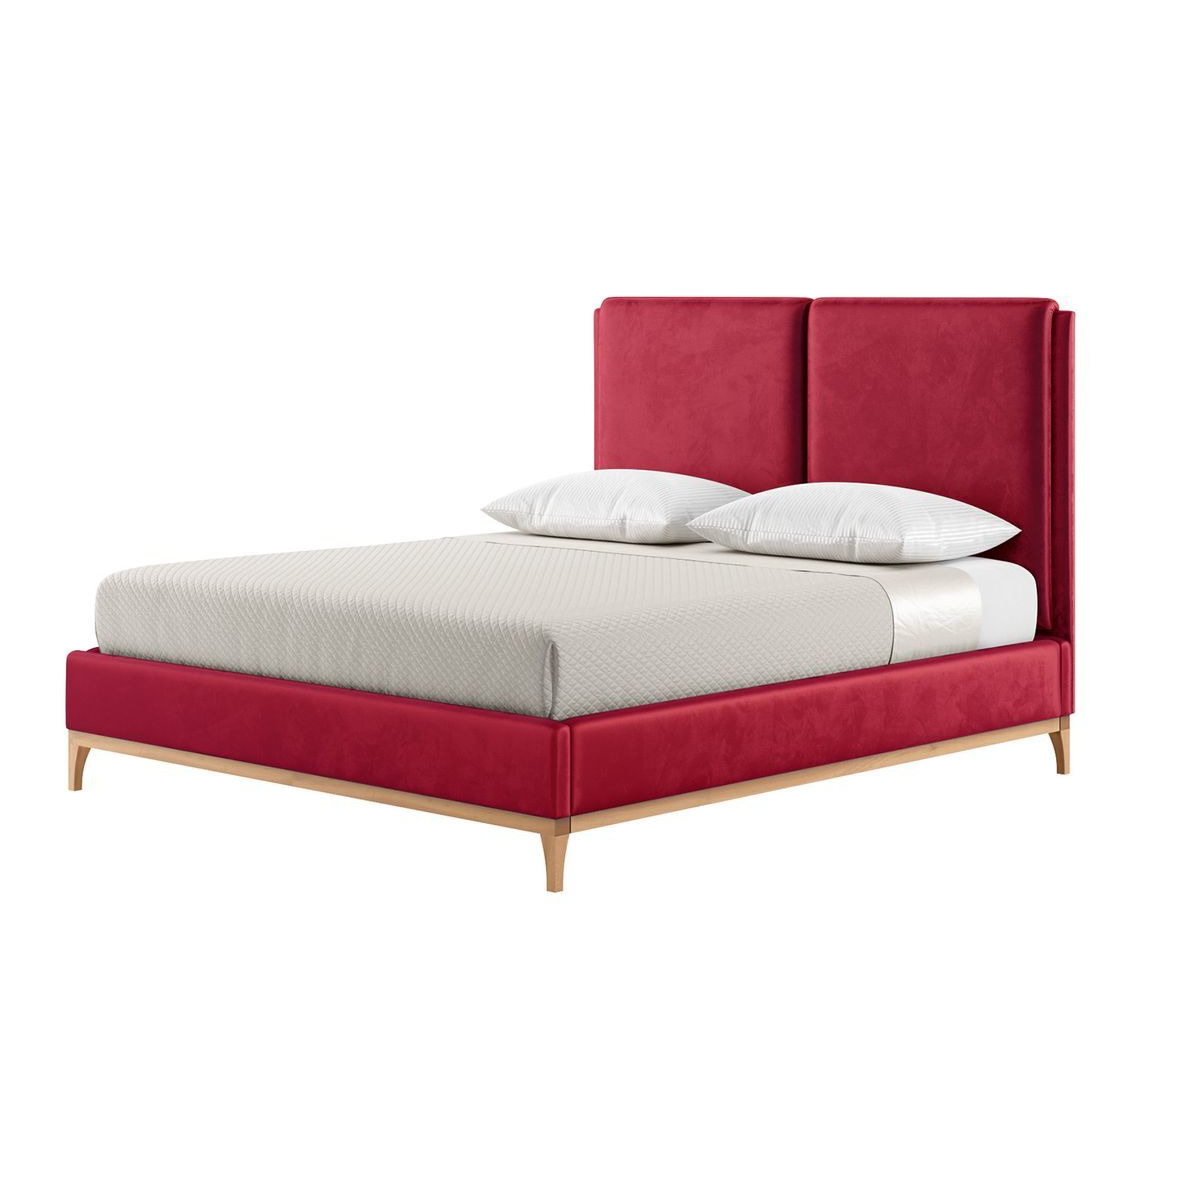 Emily 6ft Super King Size Bed Frame with contemporary twin panel headboard, dark red, Leg colour: like oak - image 1